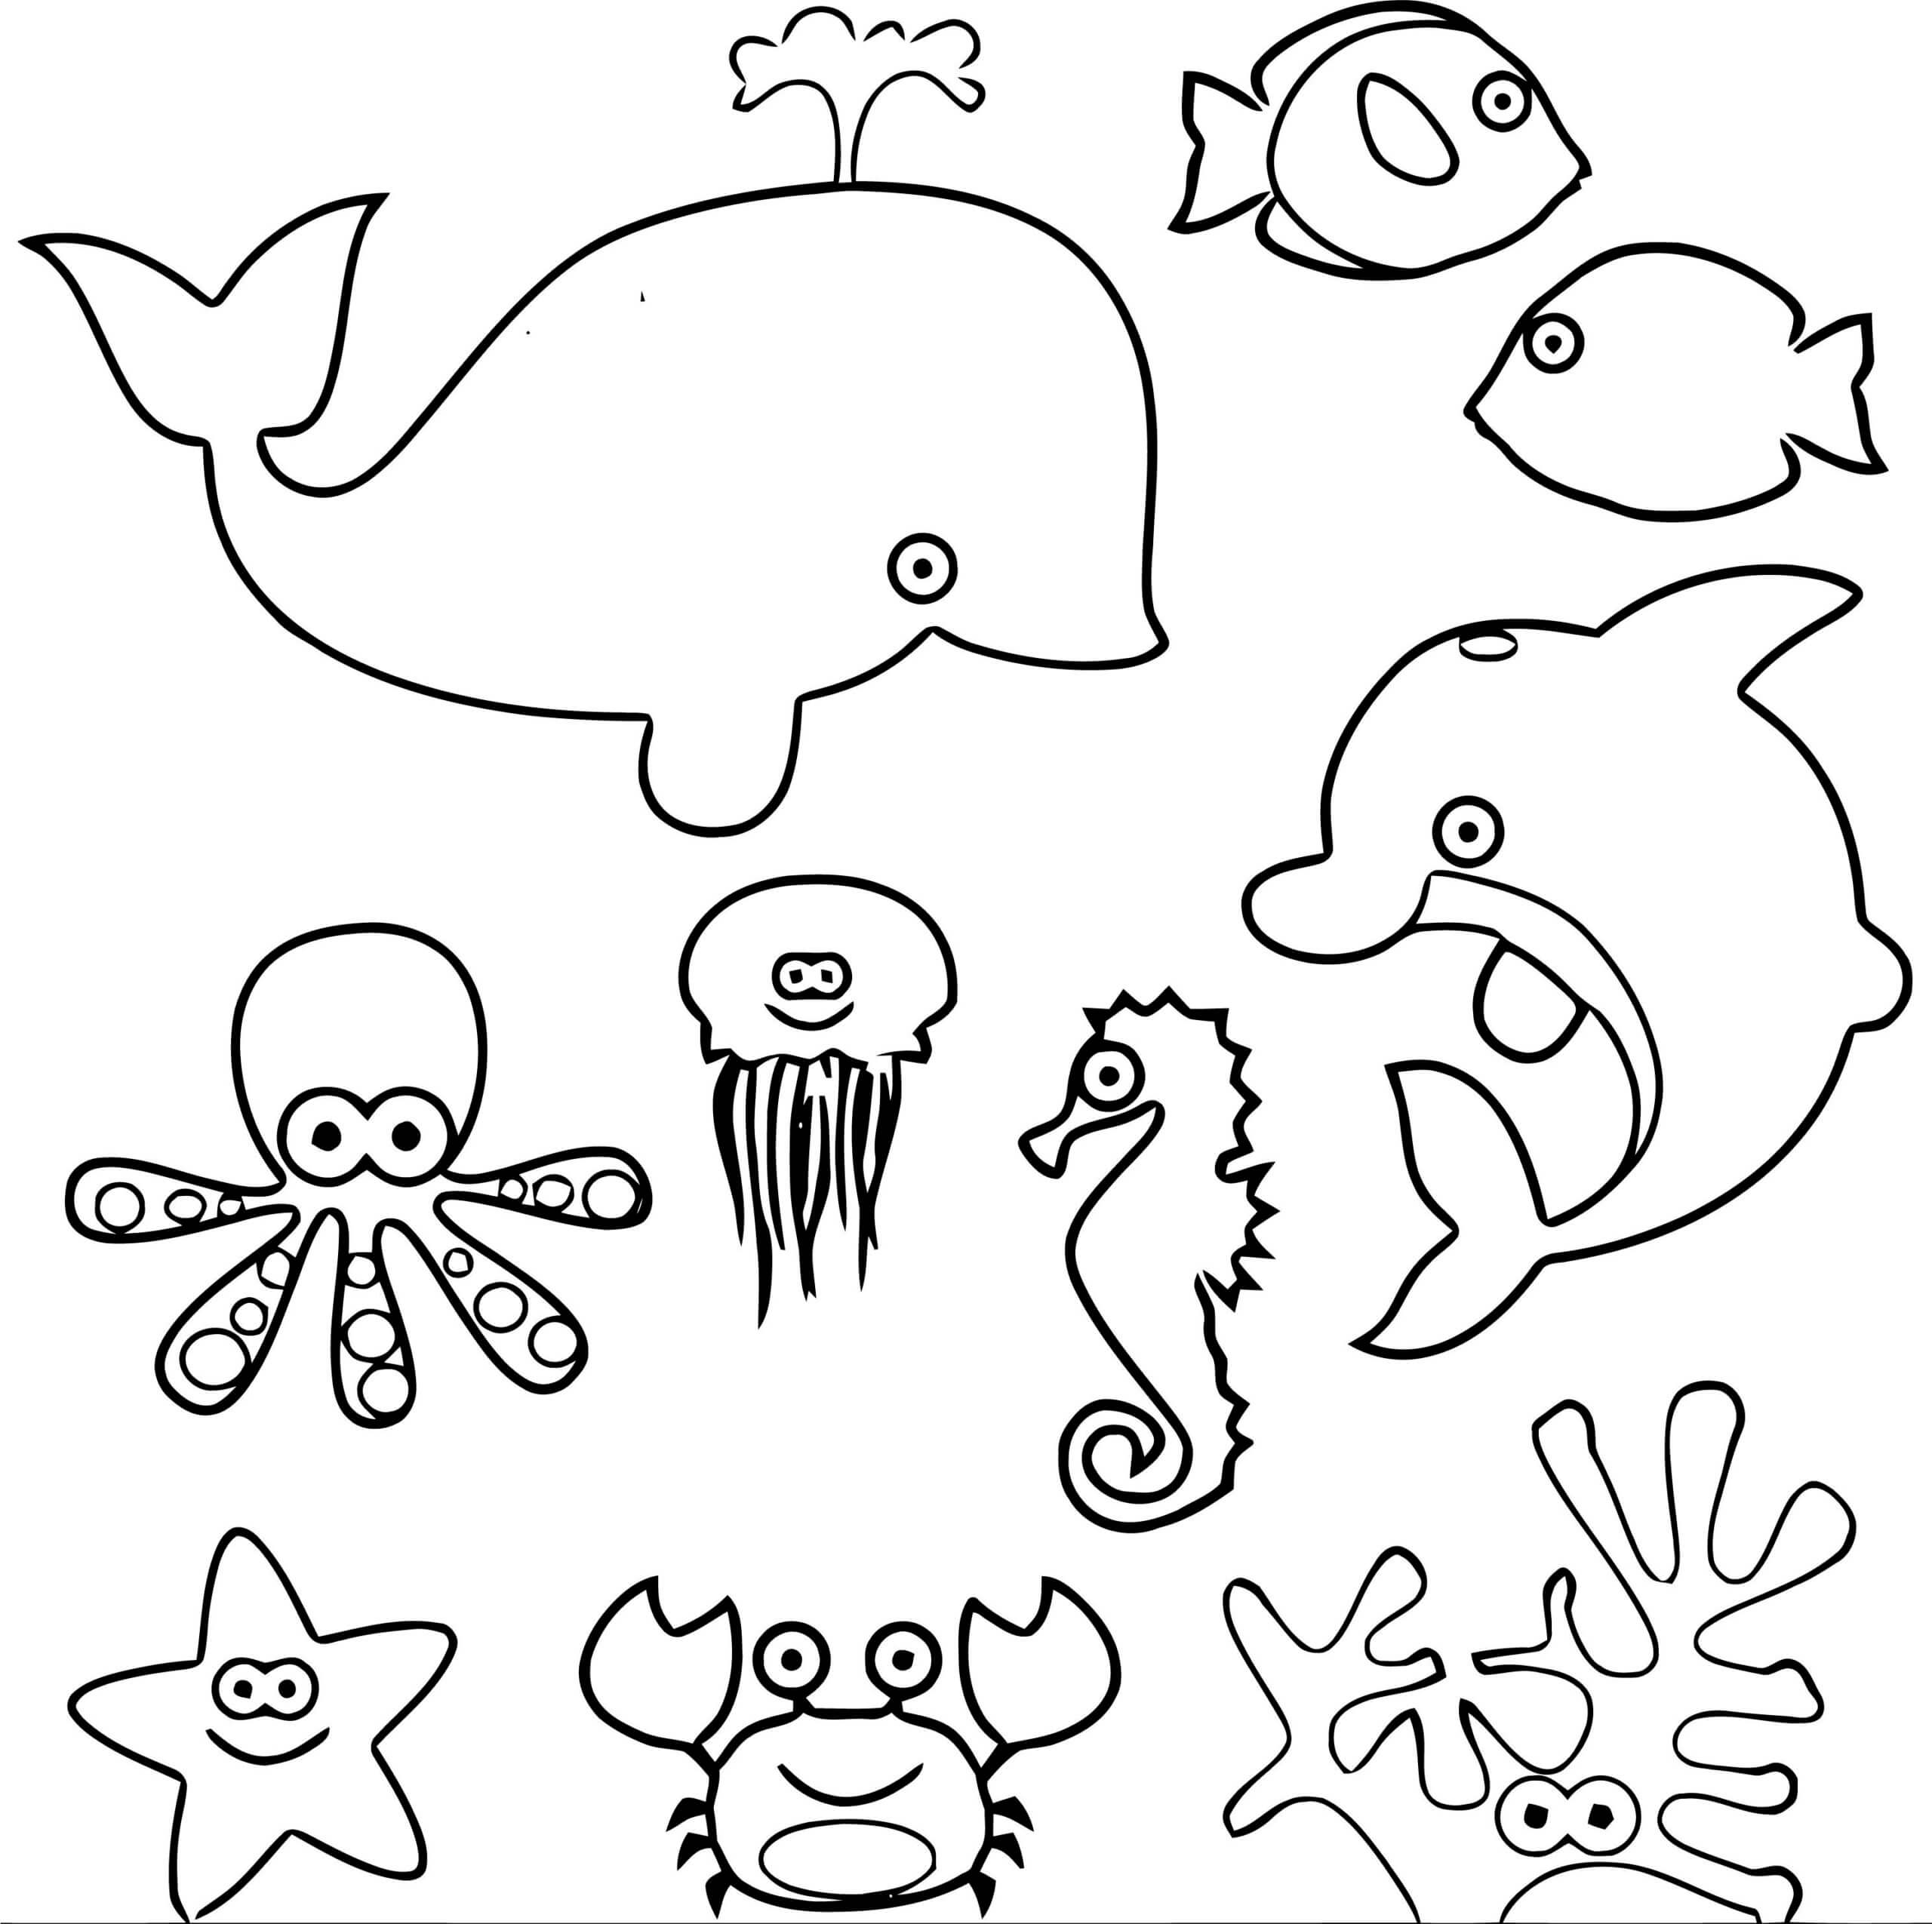 Easy Sea Animal Coloring Pages for Kids   Kids Art & Craft